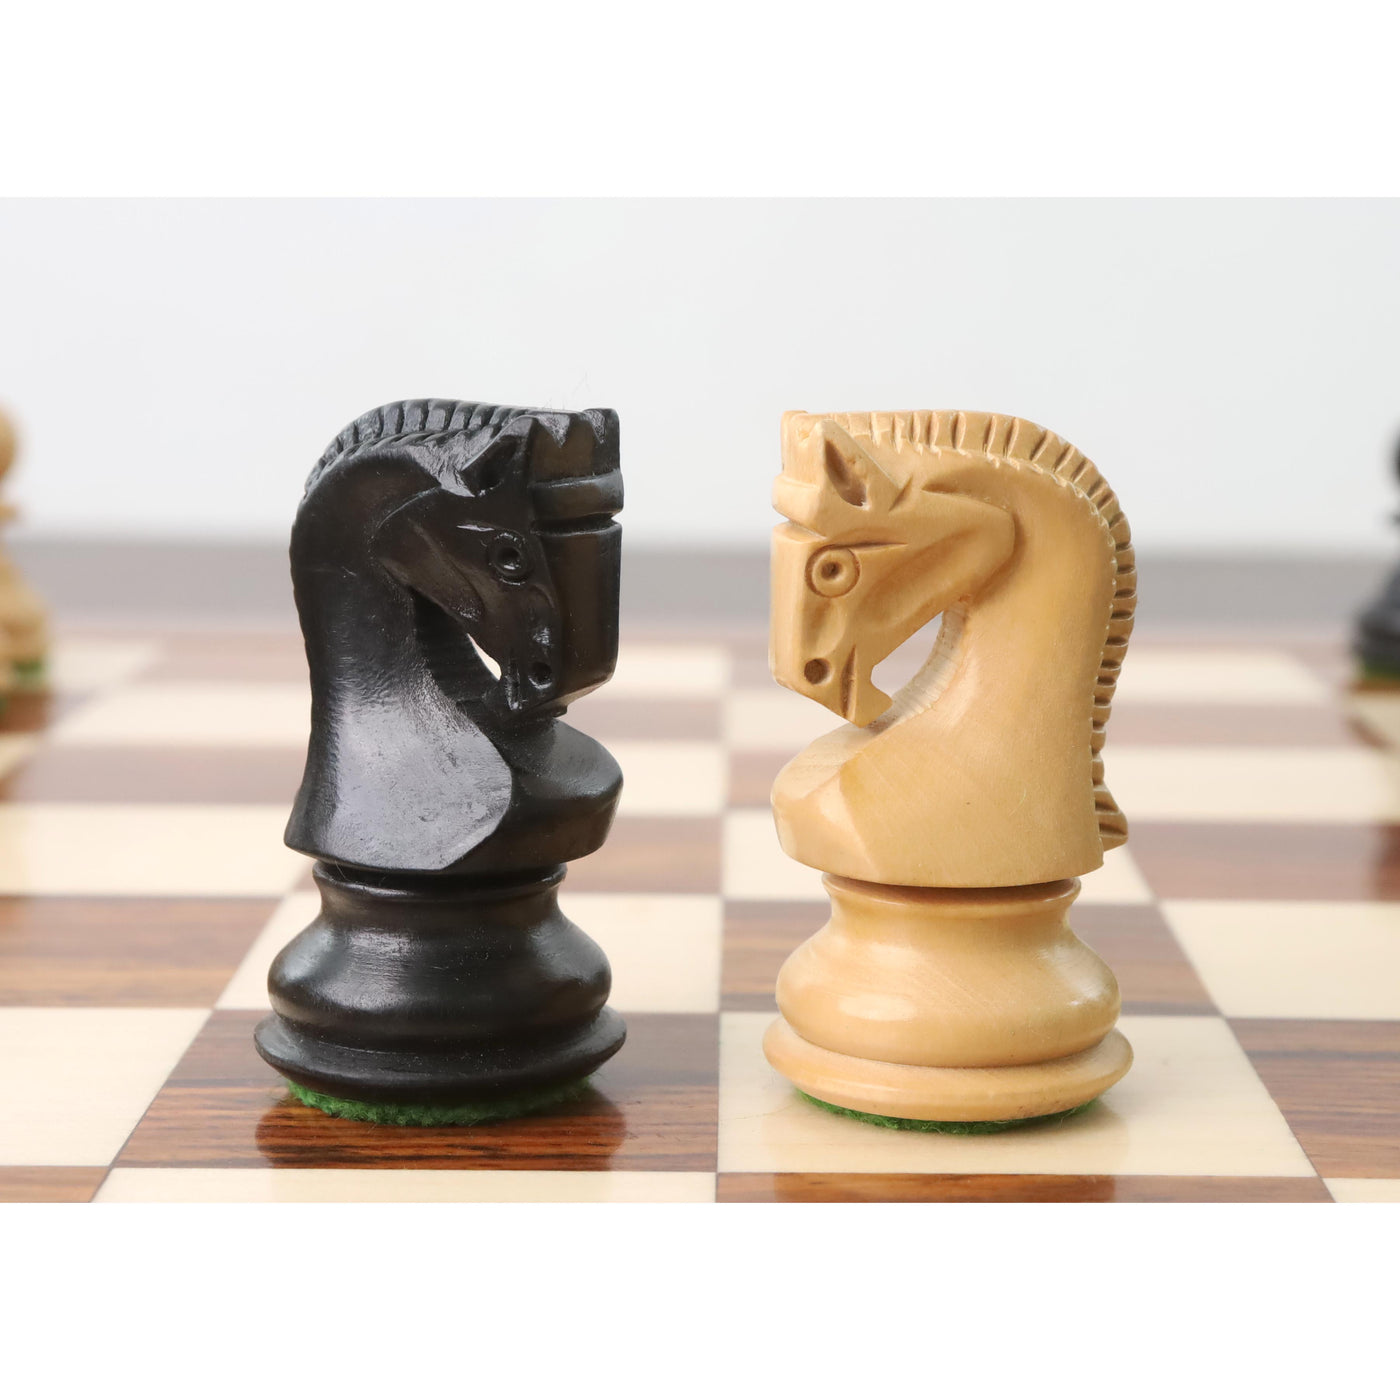 2.6" Russian Zagreb Chess set Combo -Pieces in Ebonised Boxwood with Board & Box